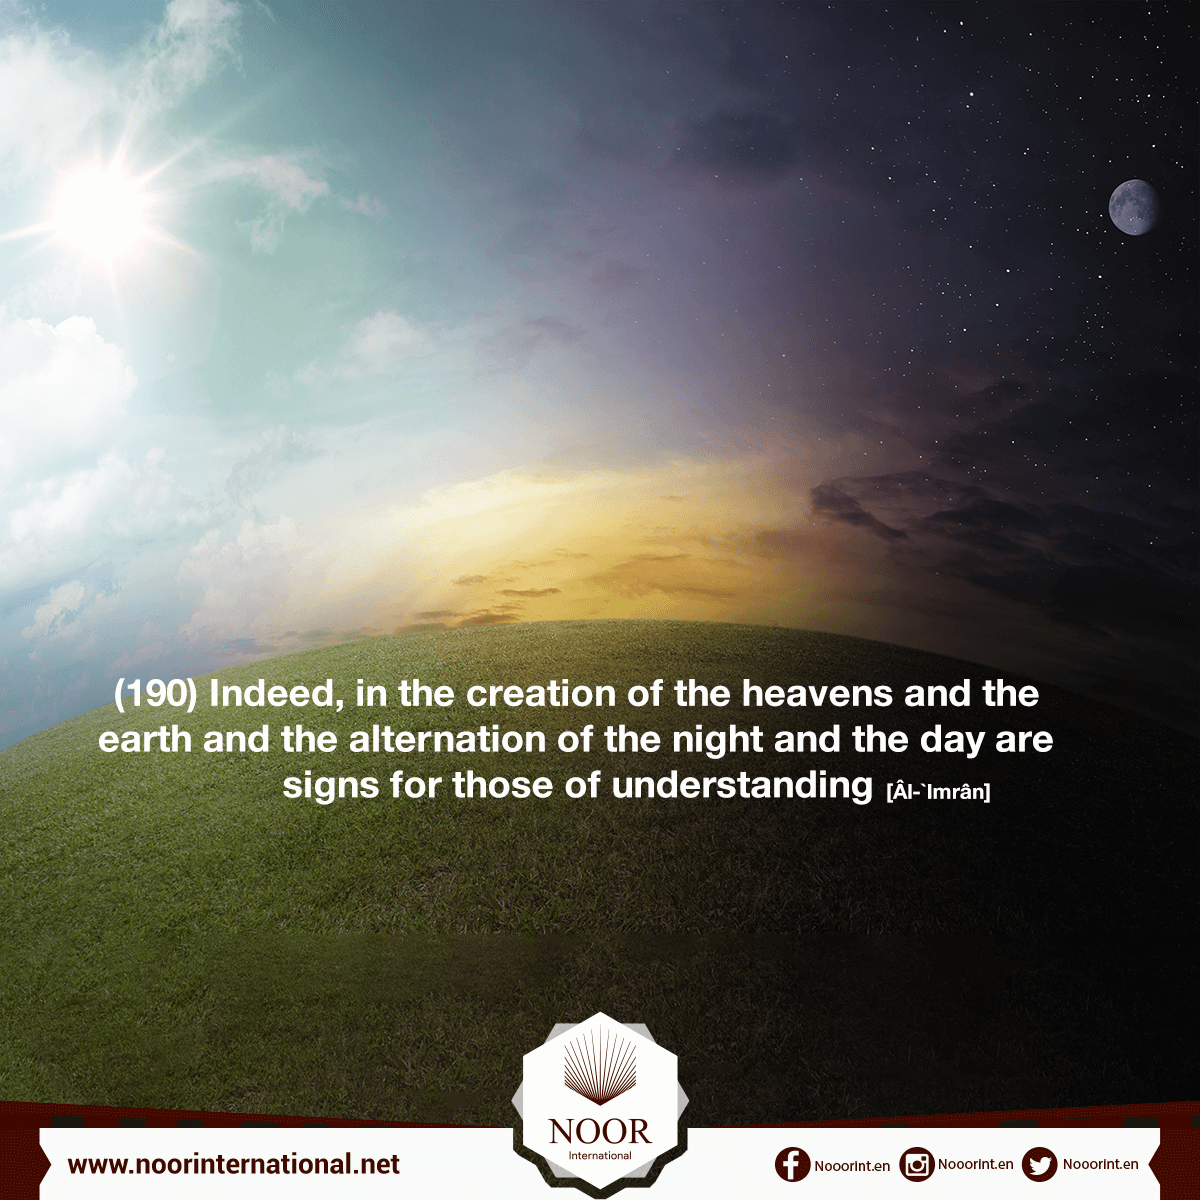 "Indeed, in the creation of the heavens and the earth ..."